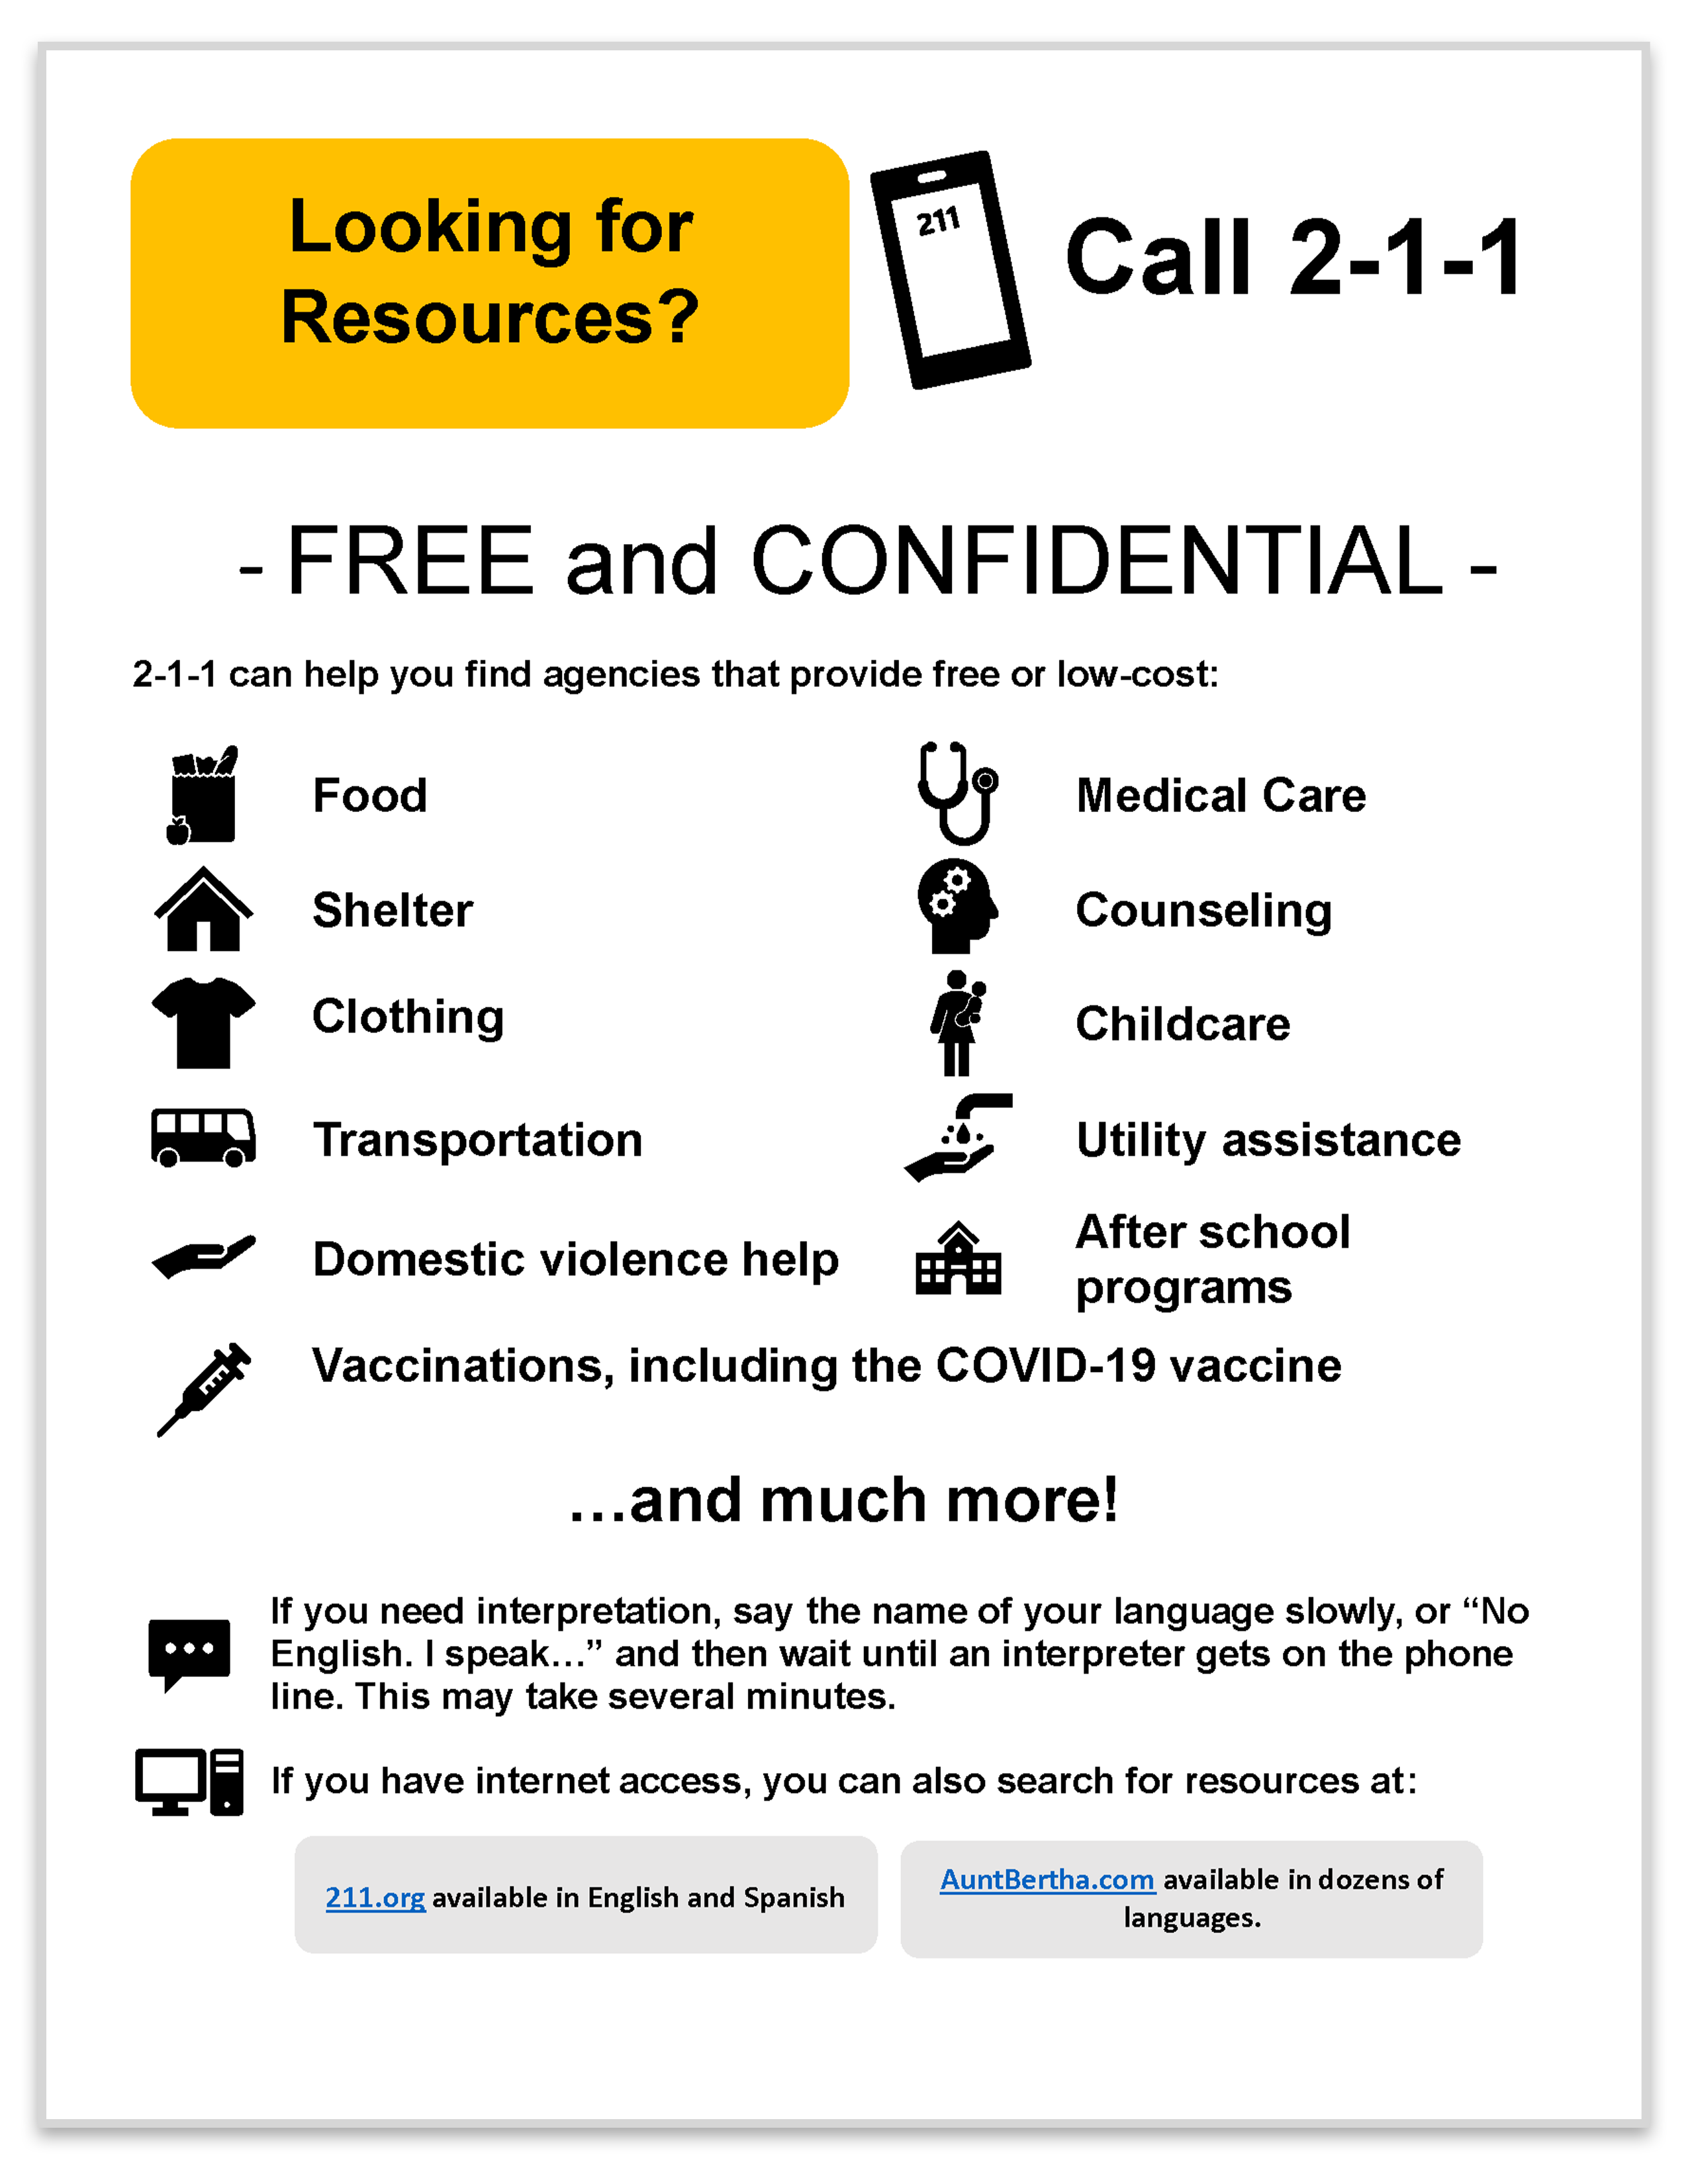 Looking for resources? Free and confidential 2-1-1 can help you find agencies that provide free or low-cost...